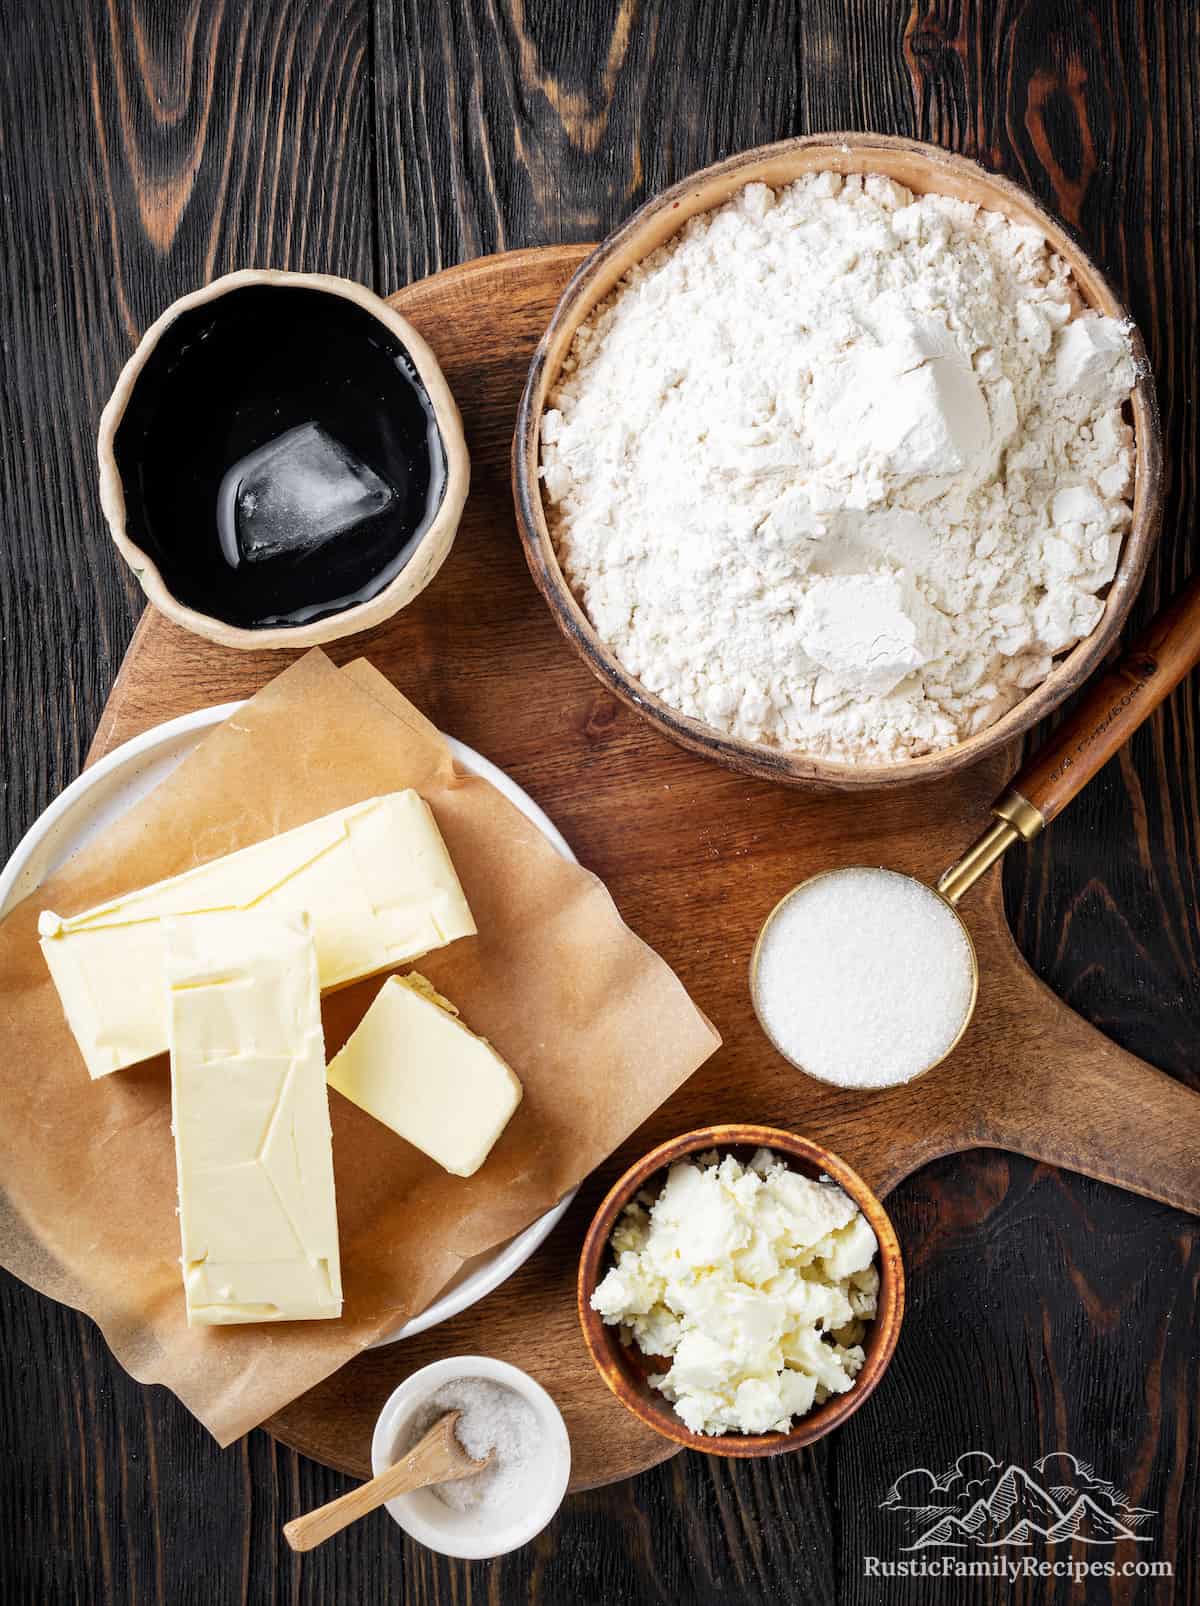 Ingredients for pie crust on a wood table